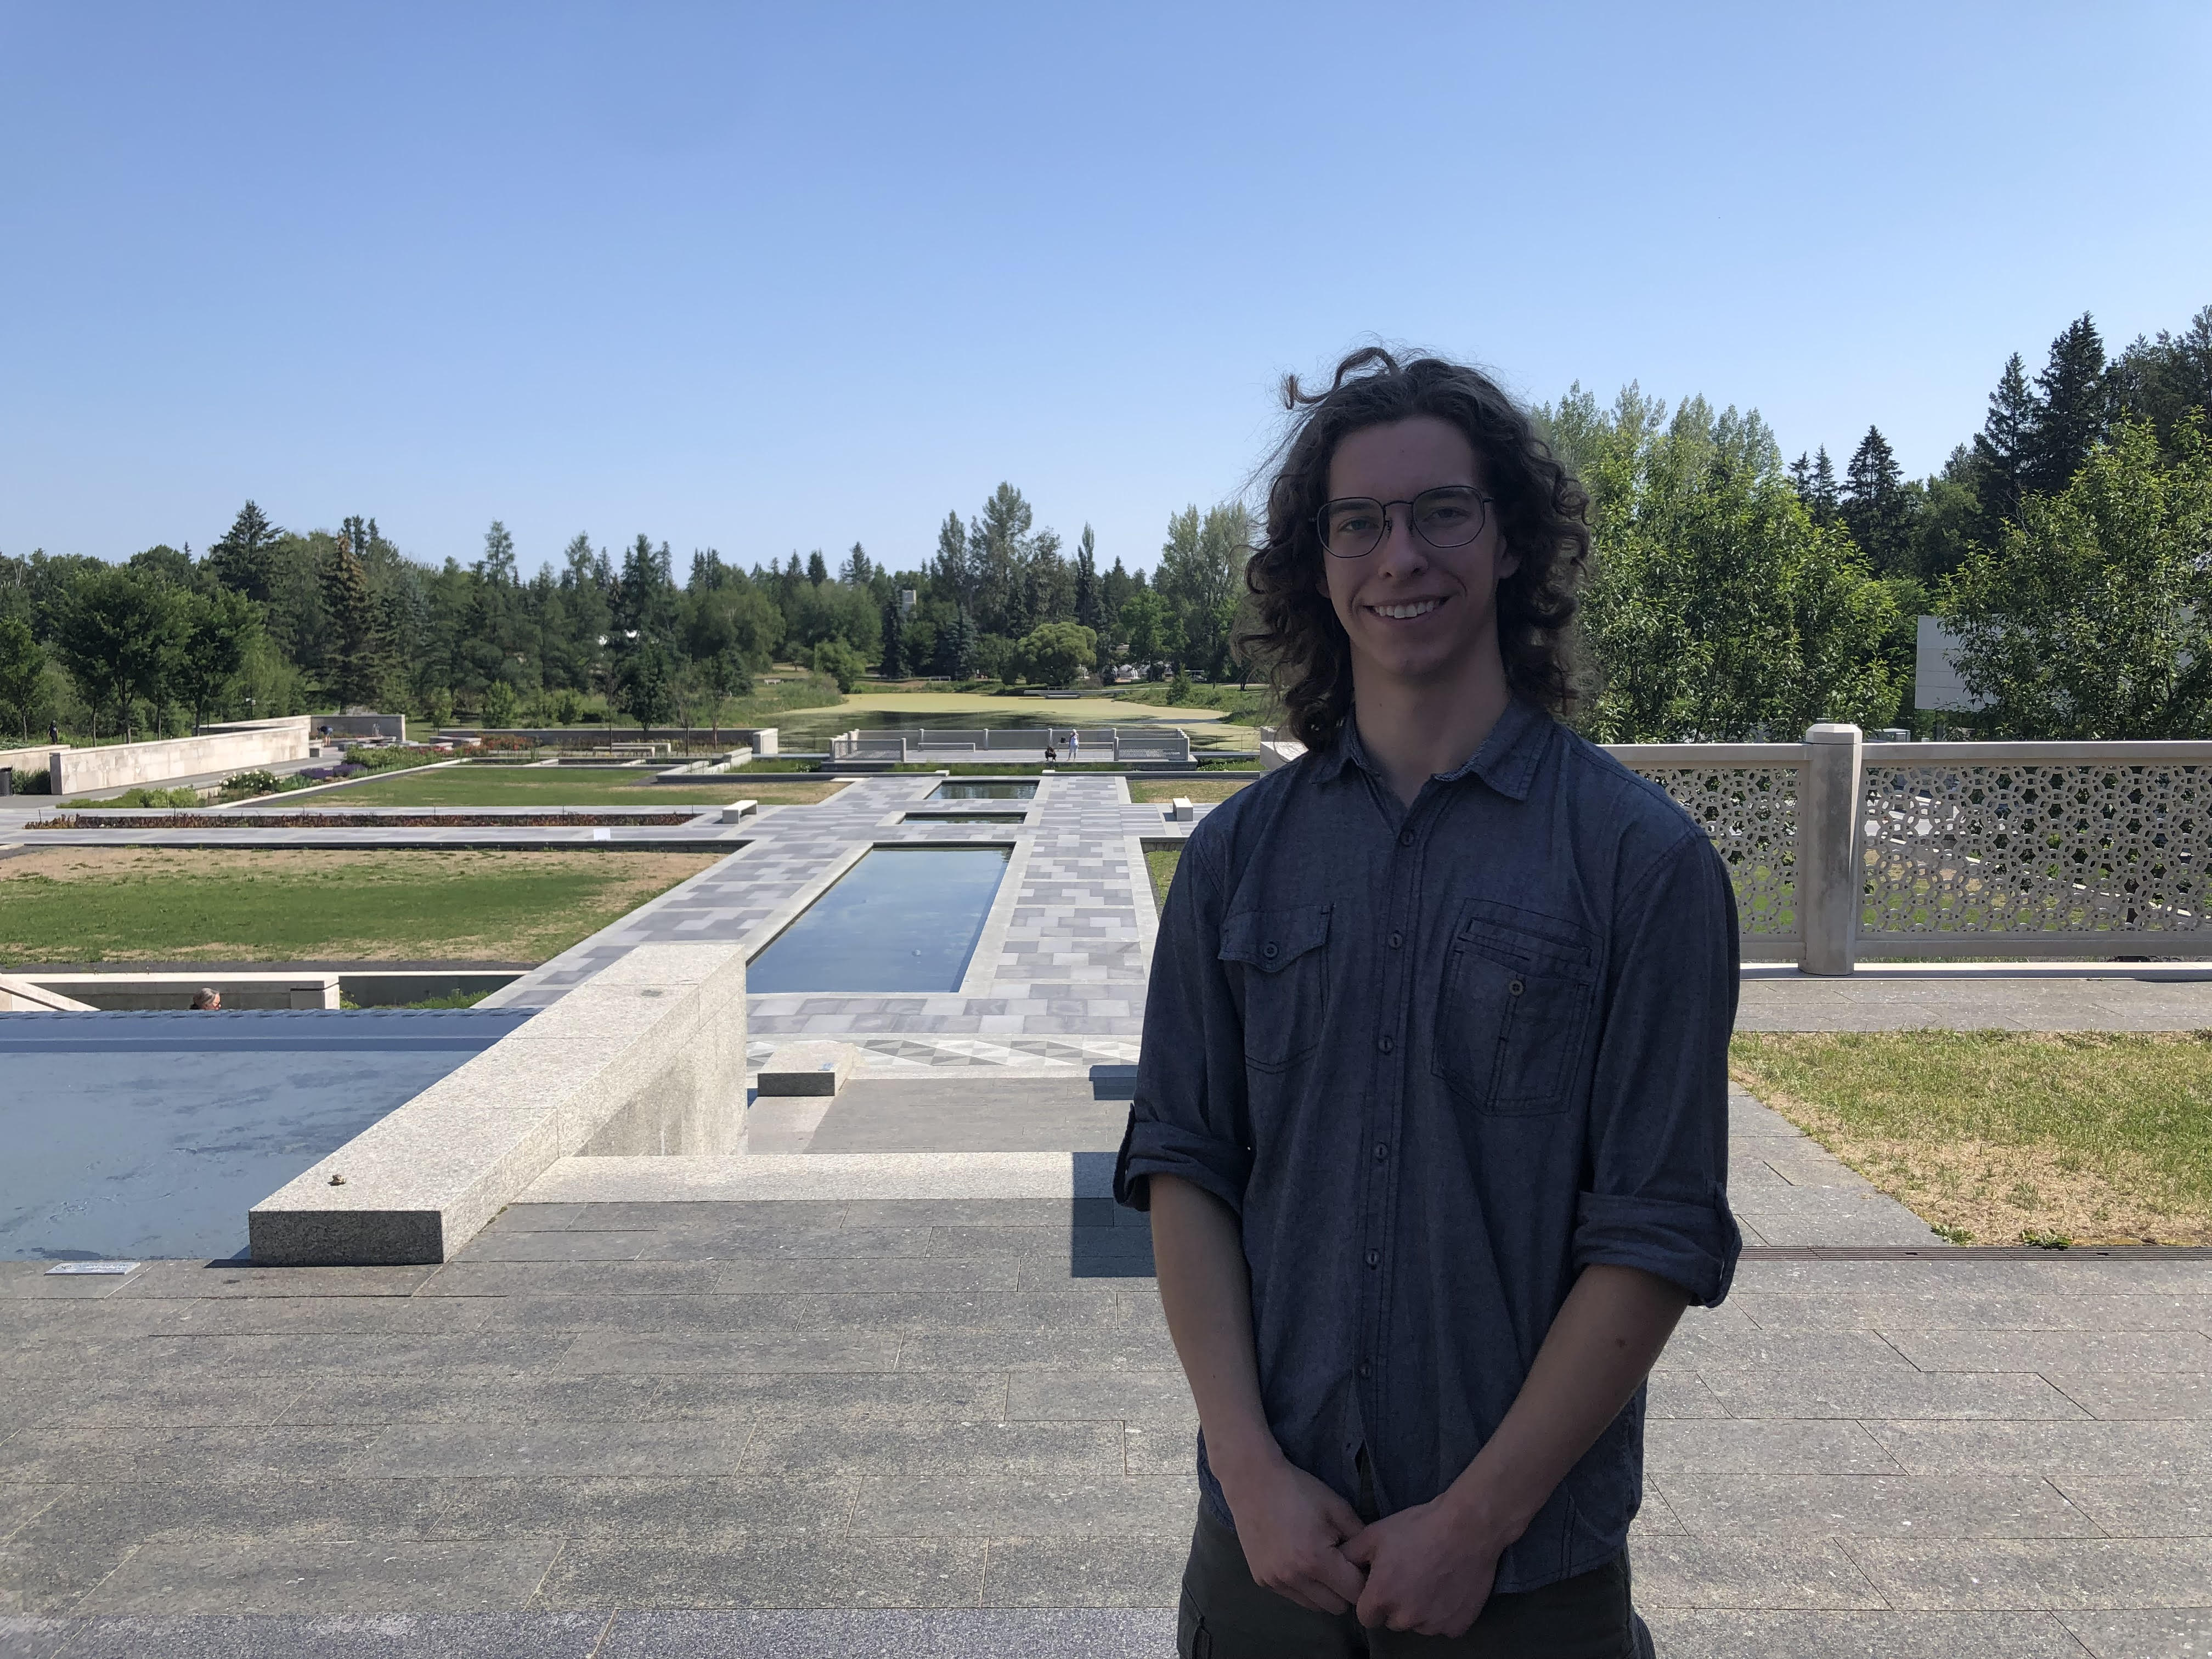 Jeremy Zittlau stands outside at the Aga Khan garden in the University of Alberta Botanical Garden. He is a 2023 recipient of the William Muir Edwards Award.